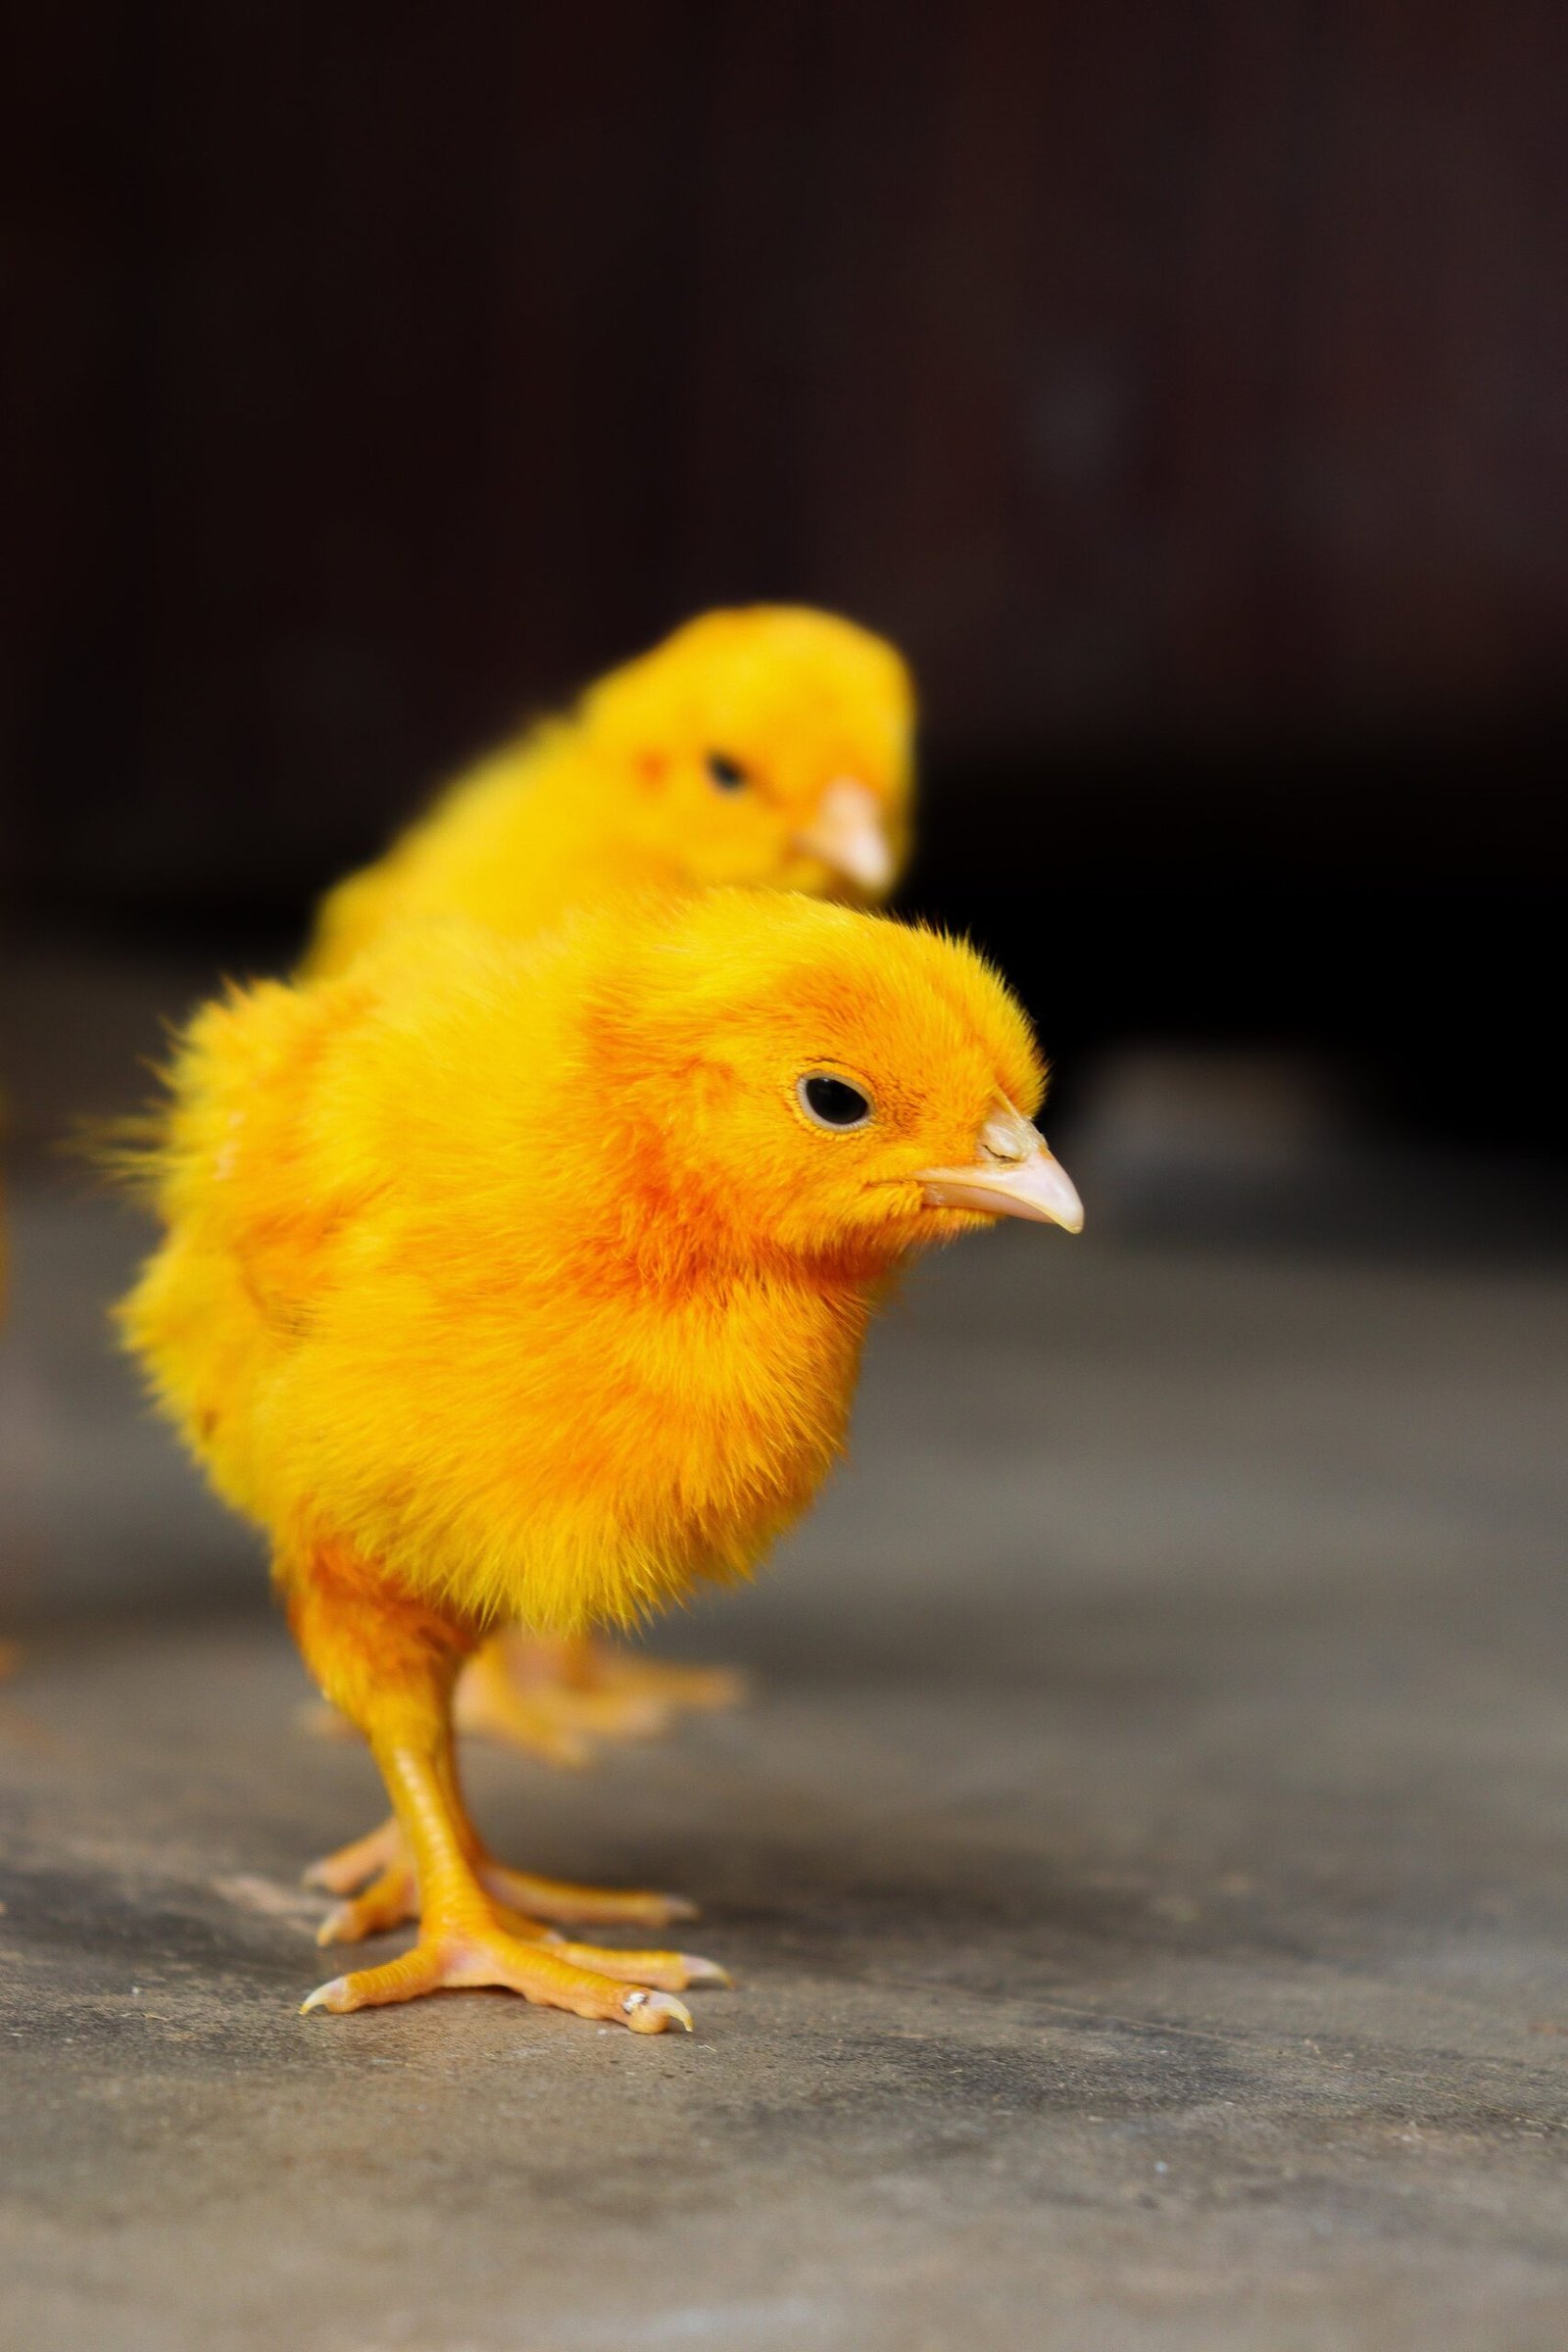 How Do You Determine The Pecking Order In A Chicken Flock?